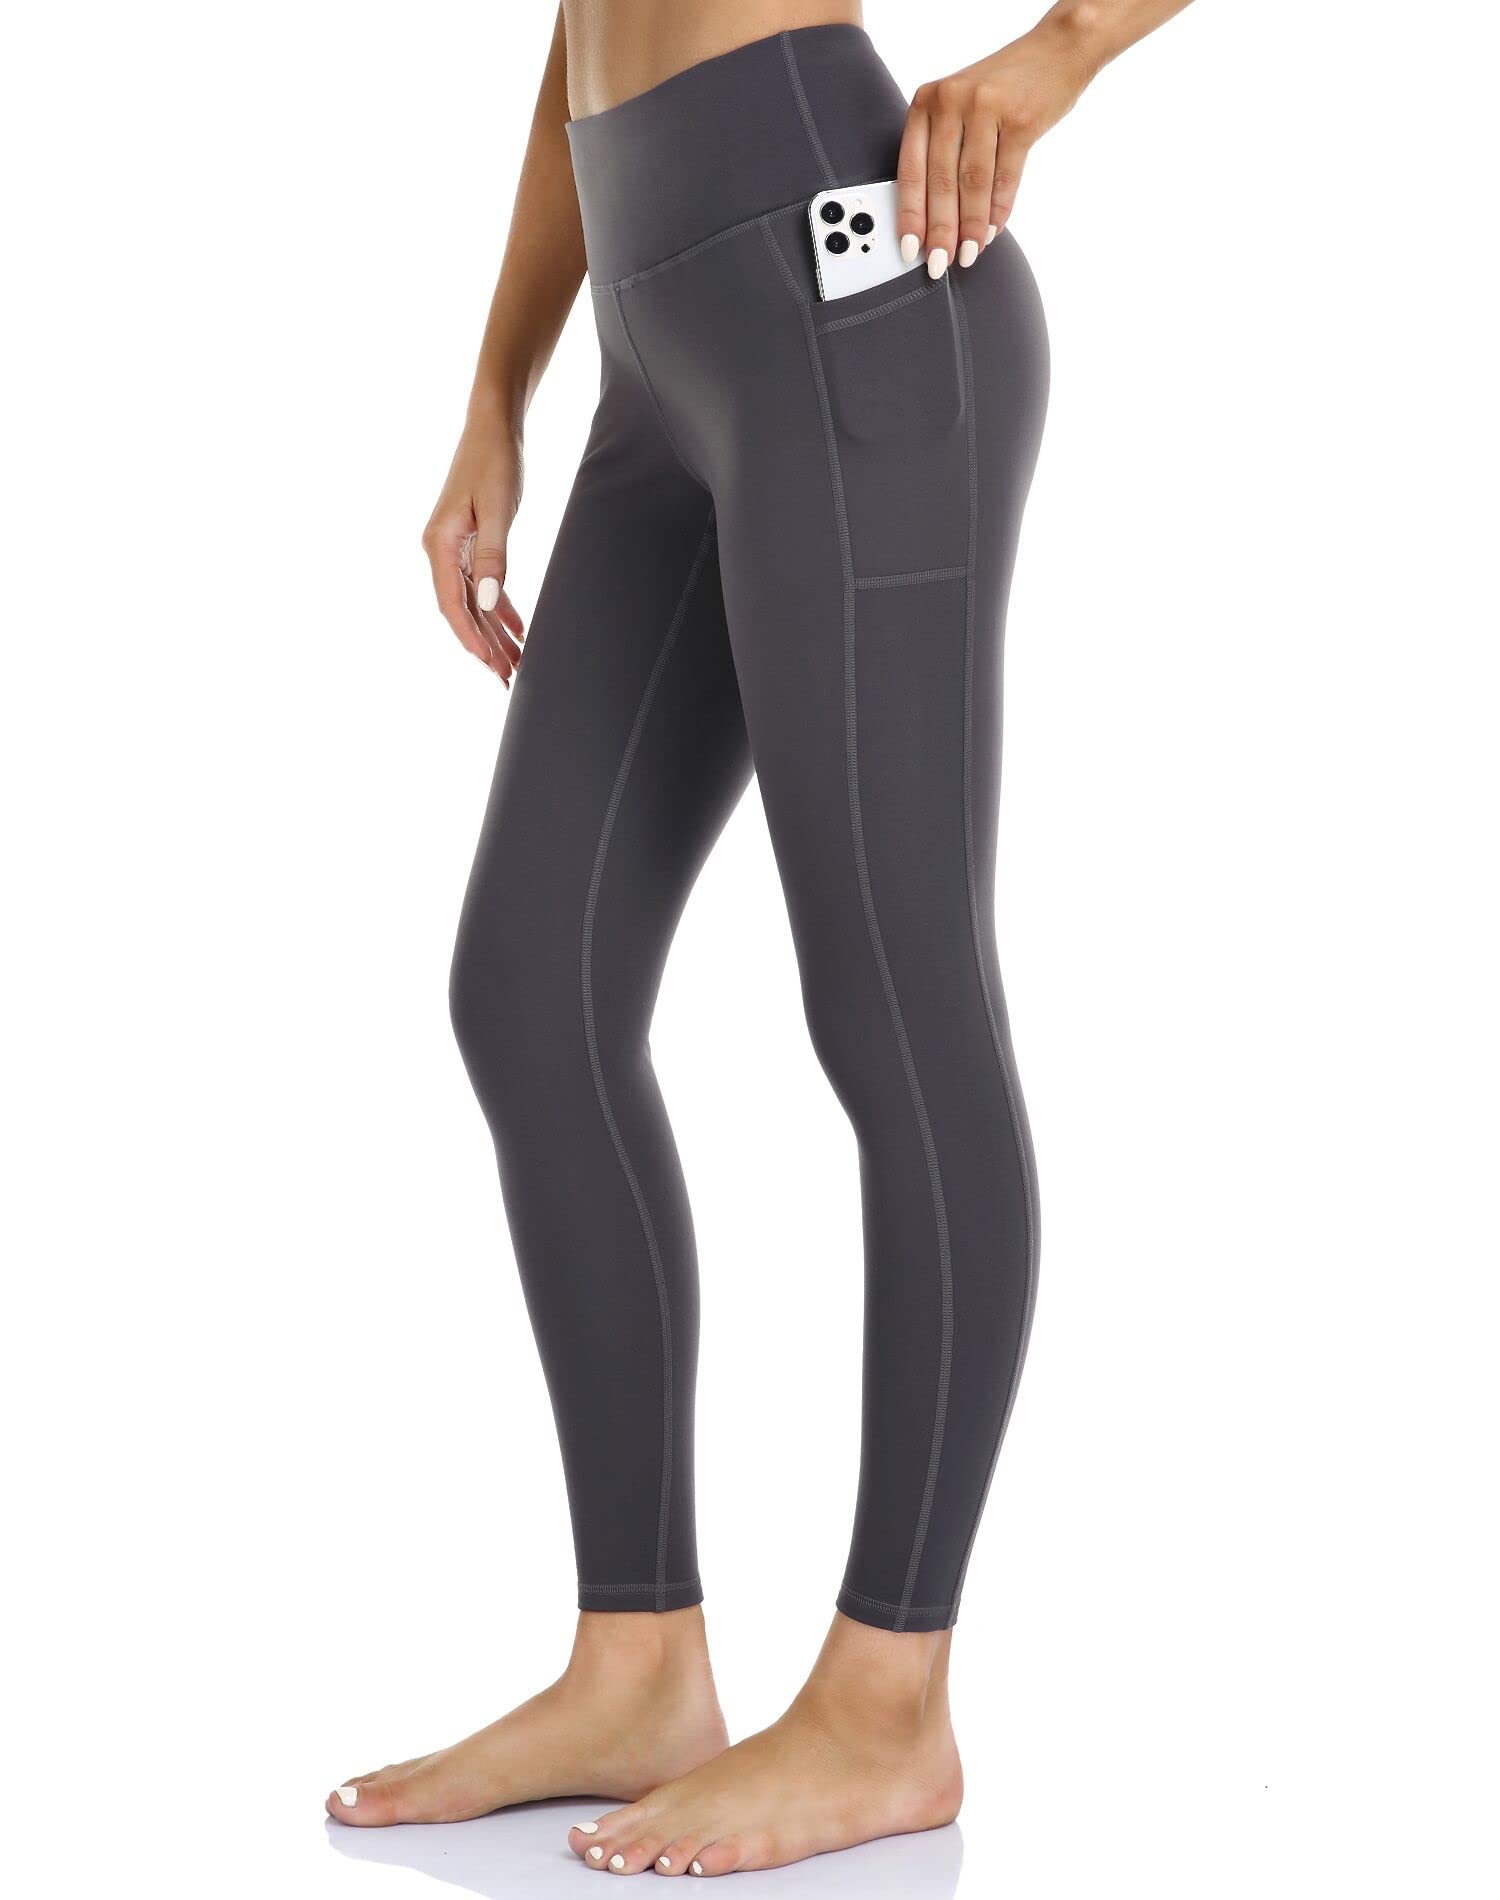  LegEnd 2 Pack Buttery Soft Yoga Pants with Pockets Non